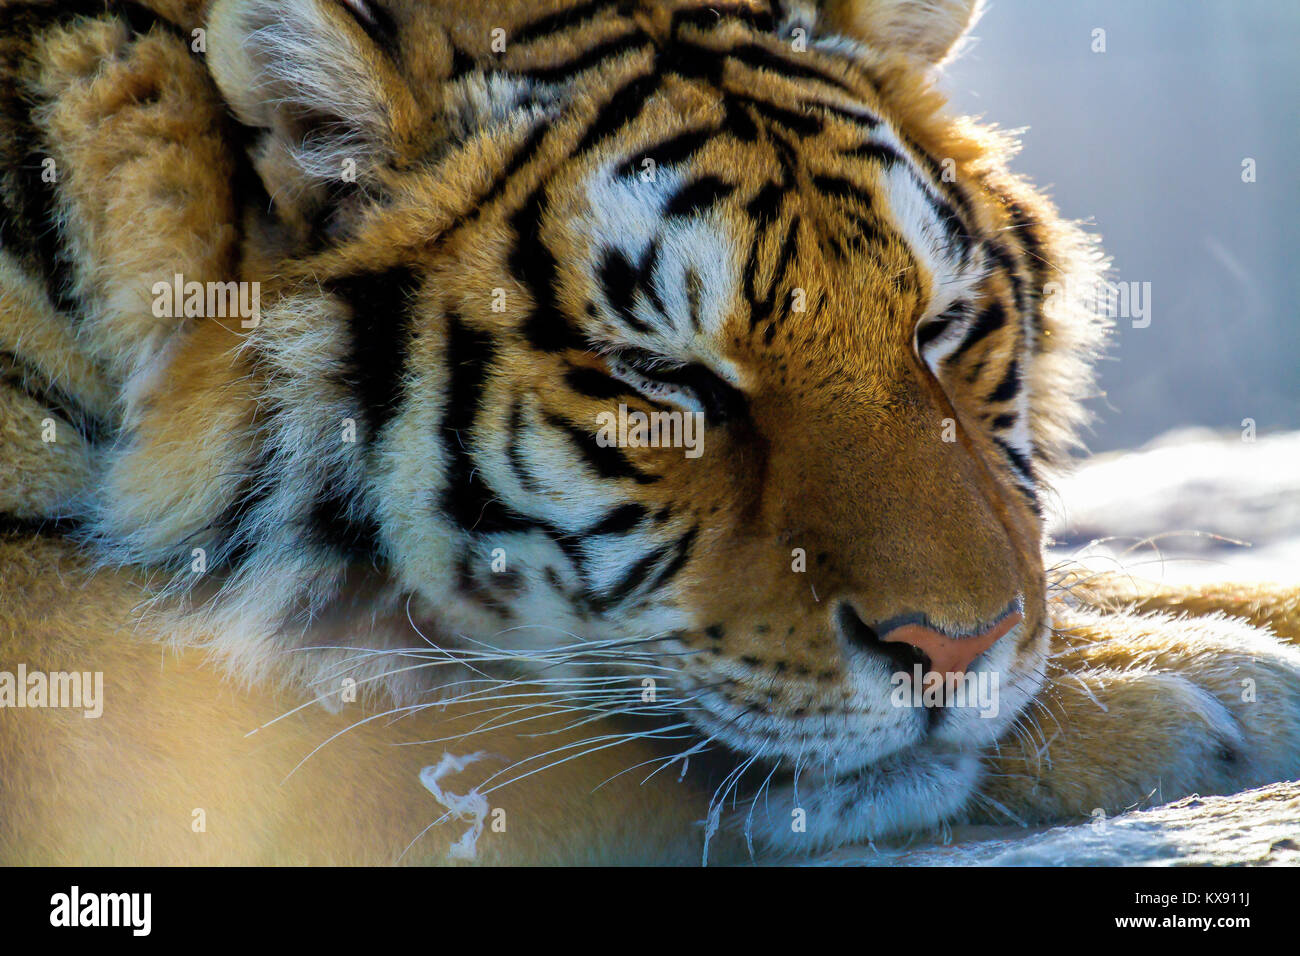 Siberian tiger in the tiger conservation park in Hailin, Heilongjiang province, North East China Stock Photo